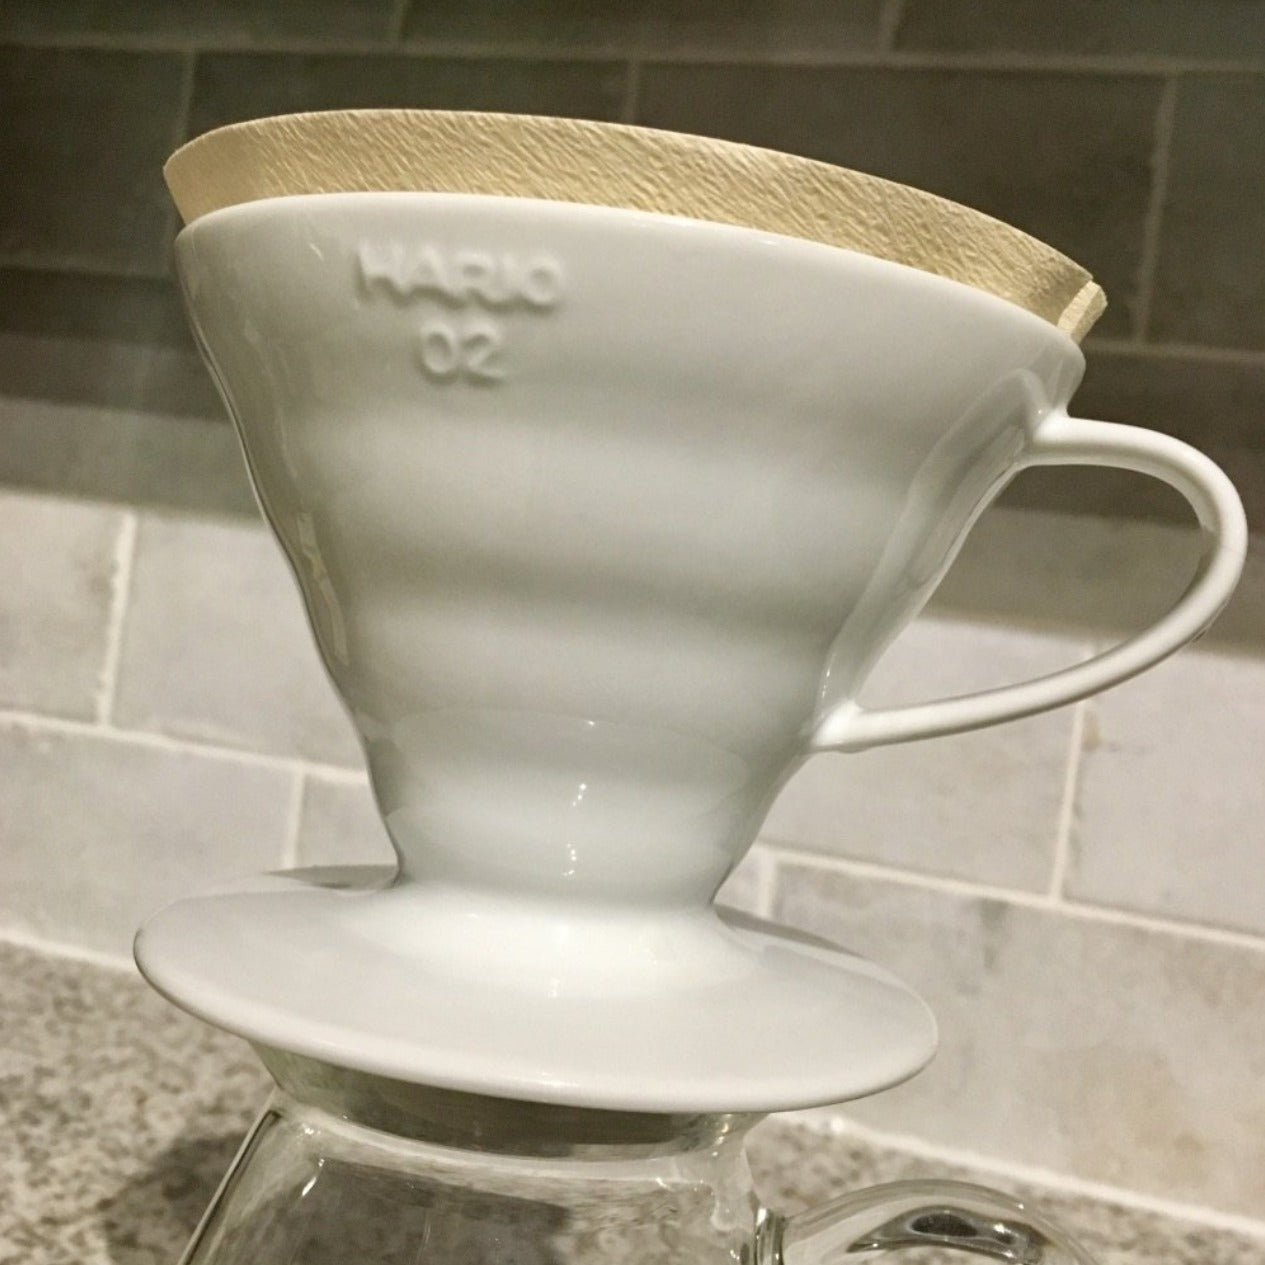 Hario V60 02 Coffee Dripper Brew Guide Little Waves Coffee Roasters